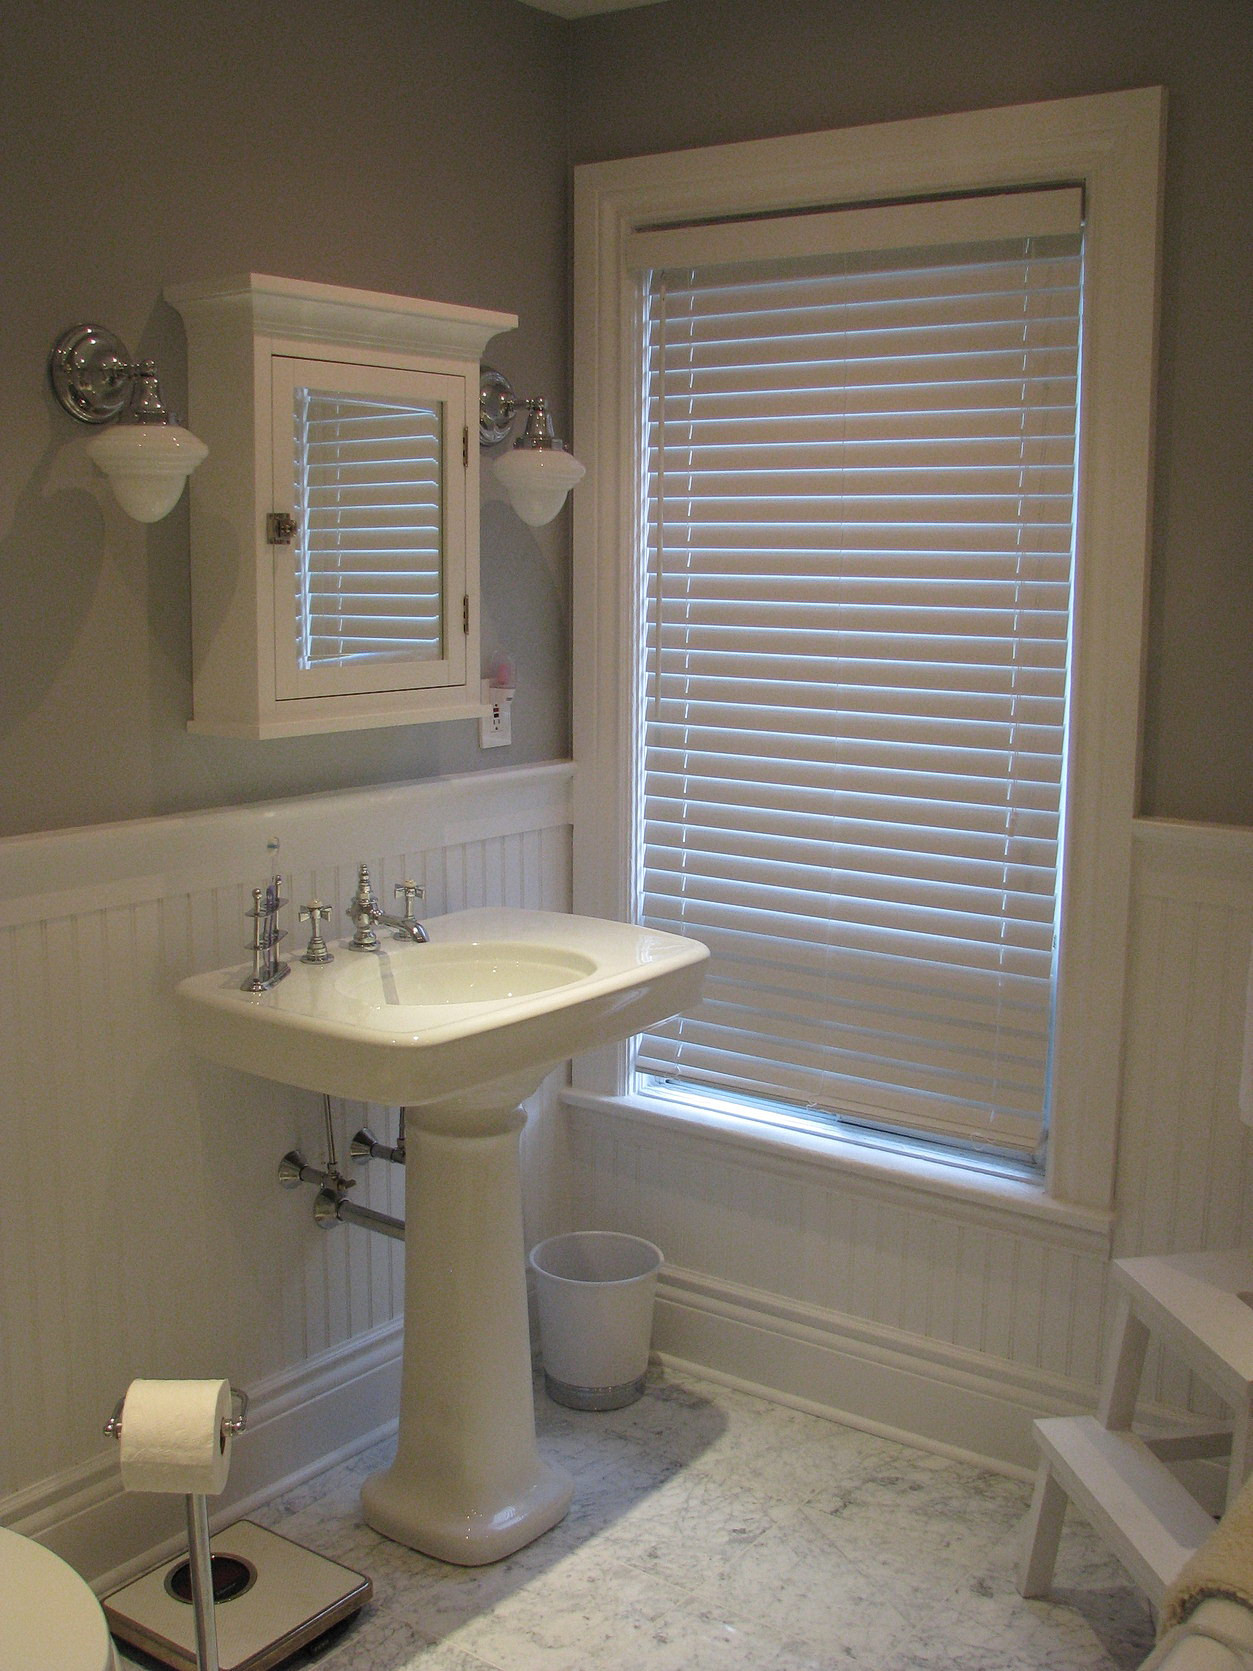 Cover Bathroom Tile Floor
 How to Cover Dated Bathroom Tile with Wainscoting